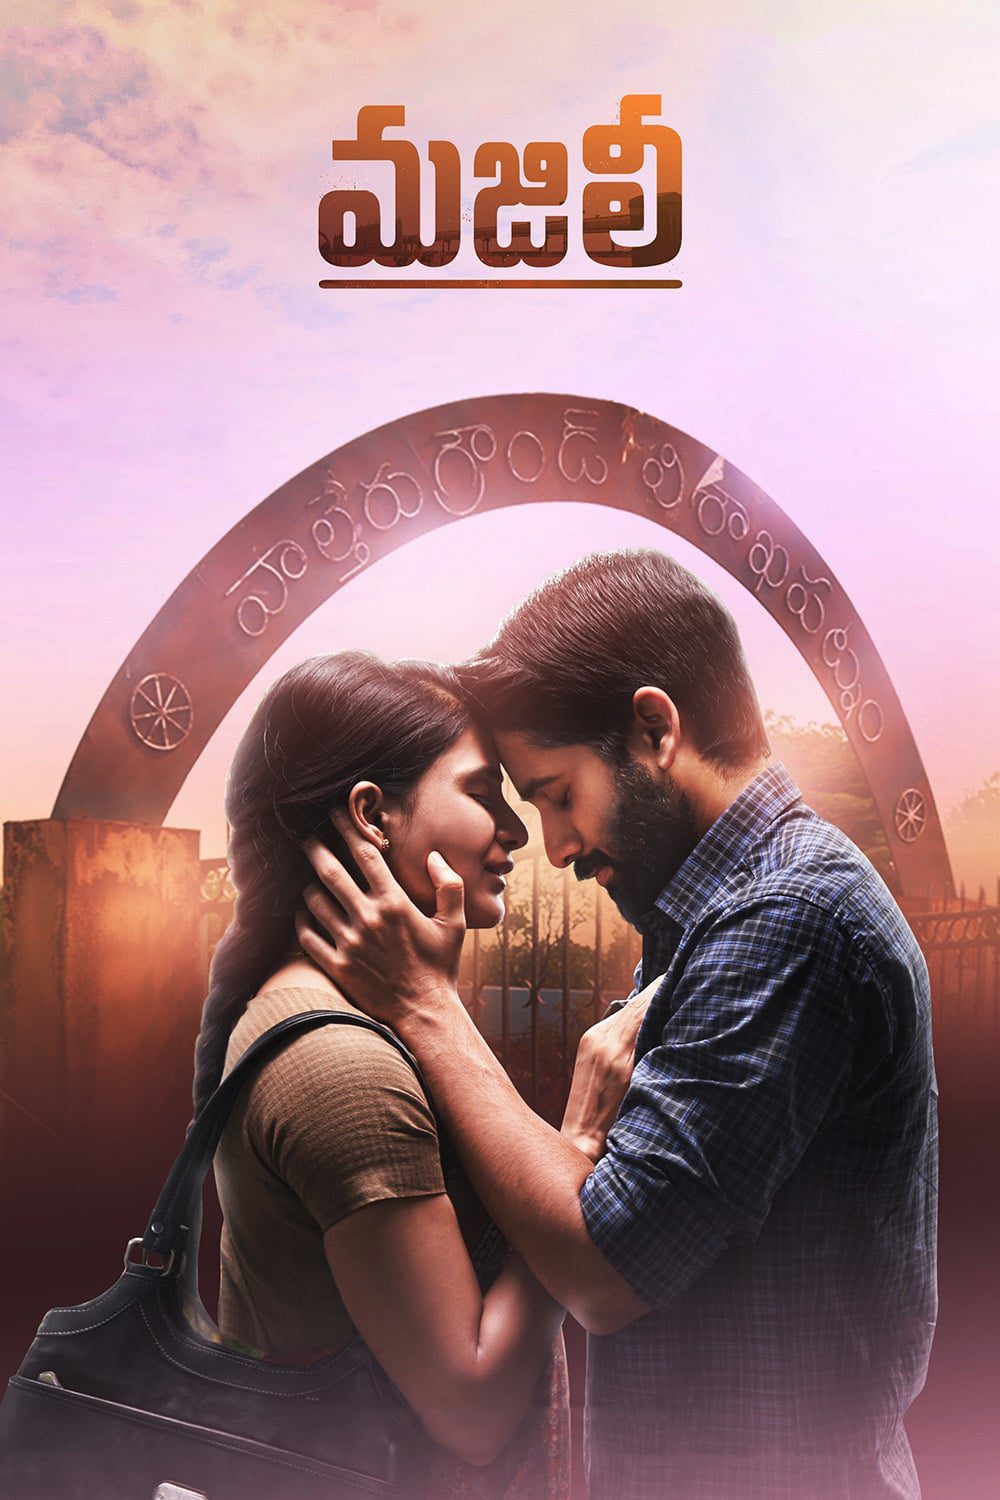 Poster for the movie "Majili"